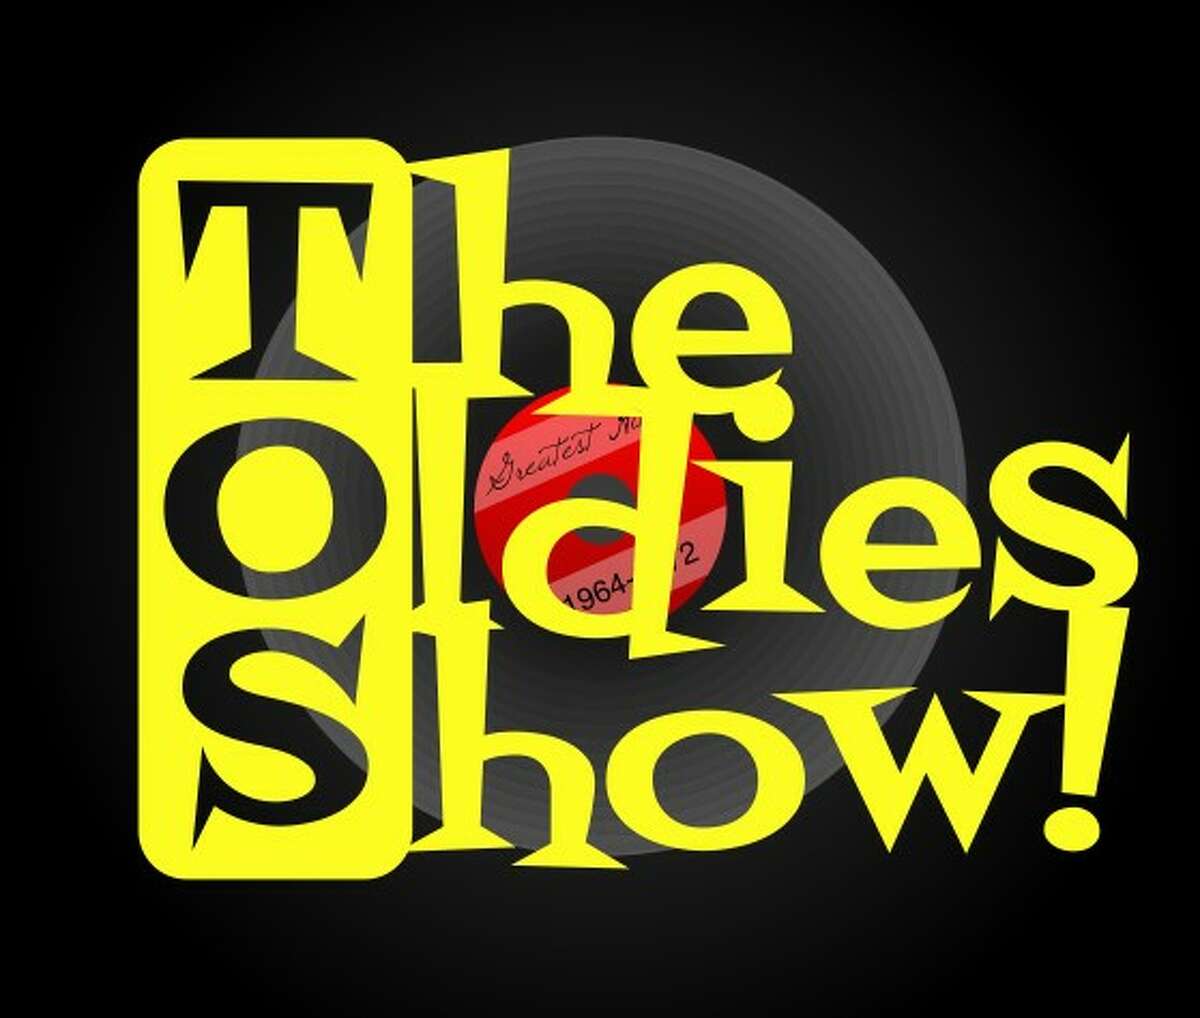 8:30 p.m. Wednesday, July 8 The Albany-based The Oldies Show, led by three dynamic singers and backed by a rhythm section and horns, play hits from the 1950's, 60's, and 70's. “American Graffiti” is the 1973 Americancoming-of-age comedy film directed and co-written by George Lucas, starring Richard Dreyfuss, Ron Howard, Harrison Ford and Cindy Williams.